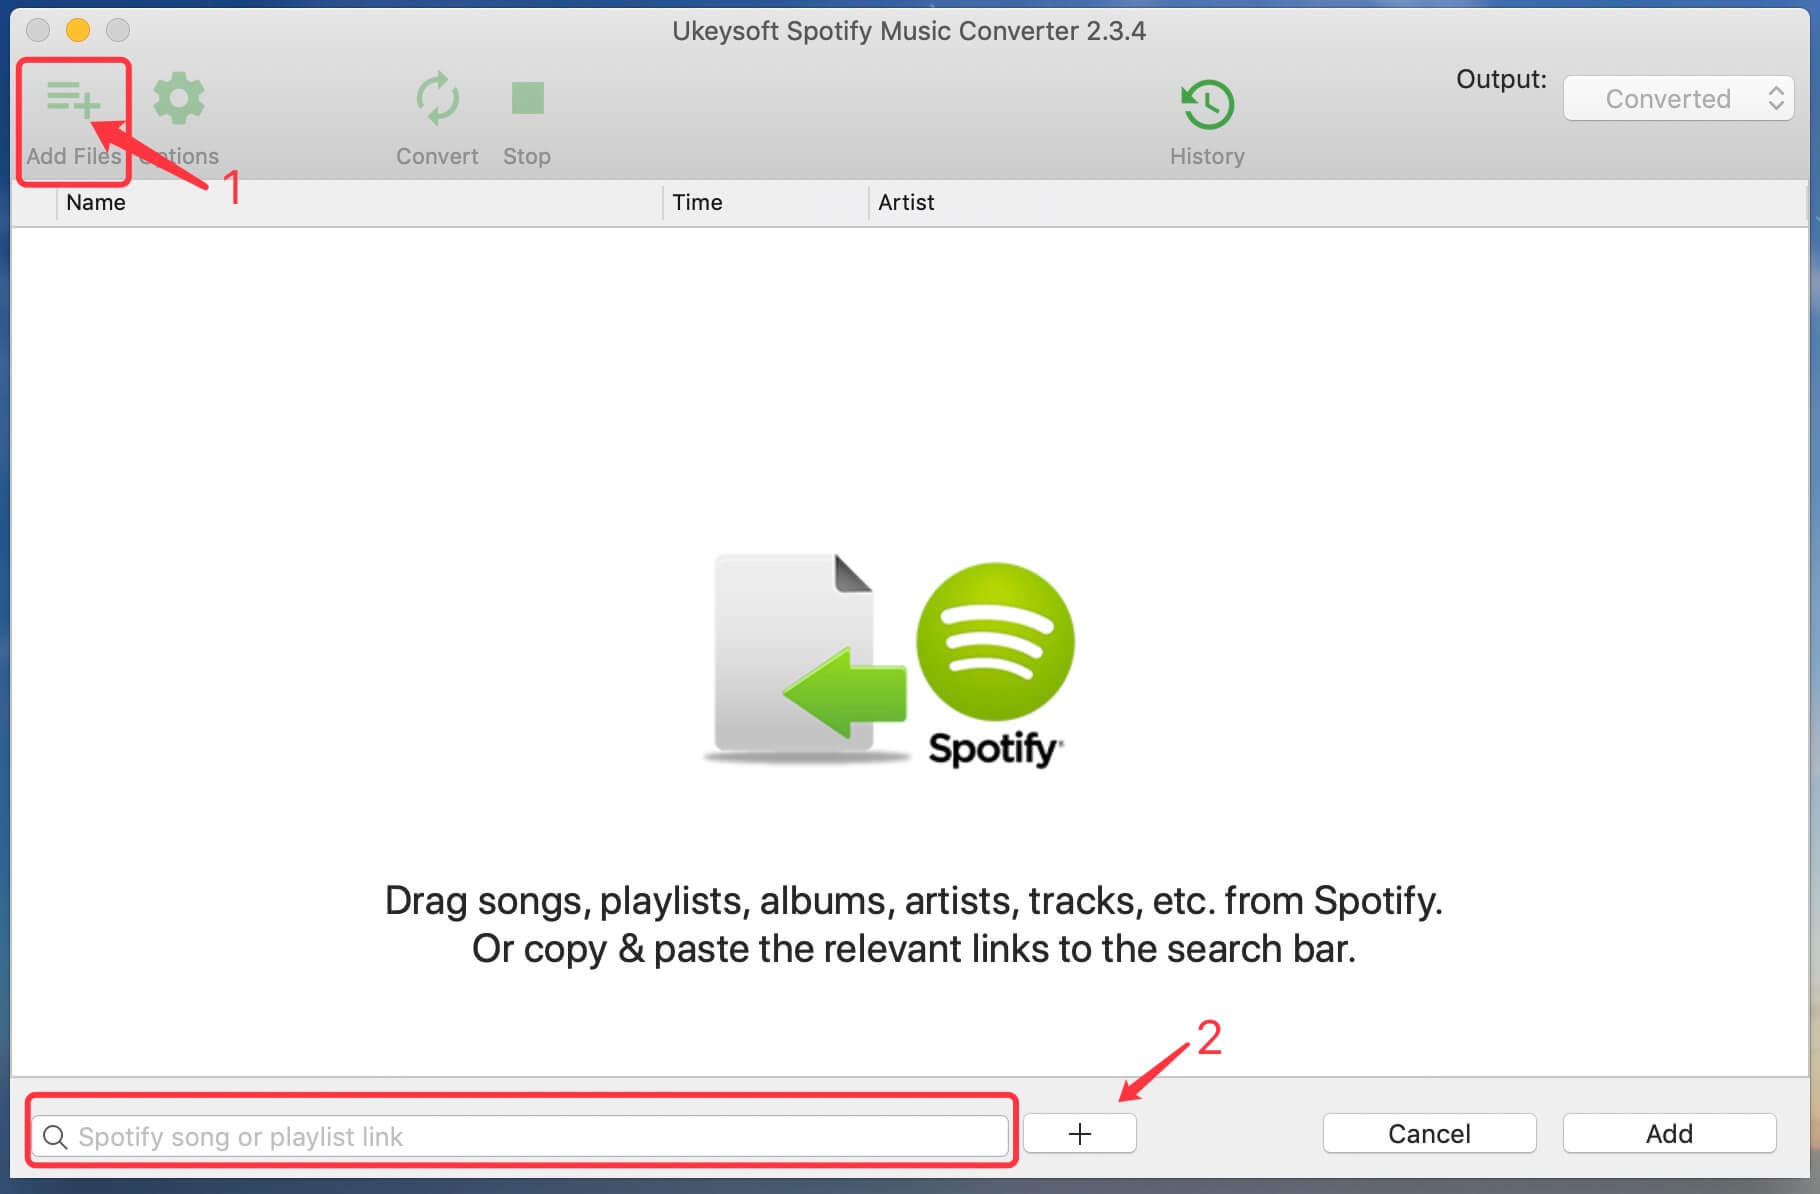 add spotify songs to the converter